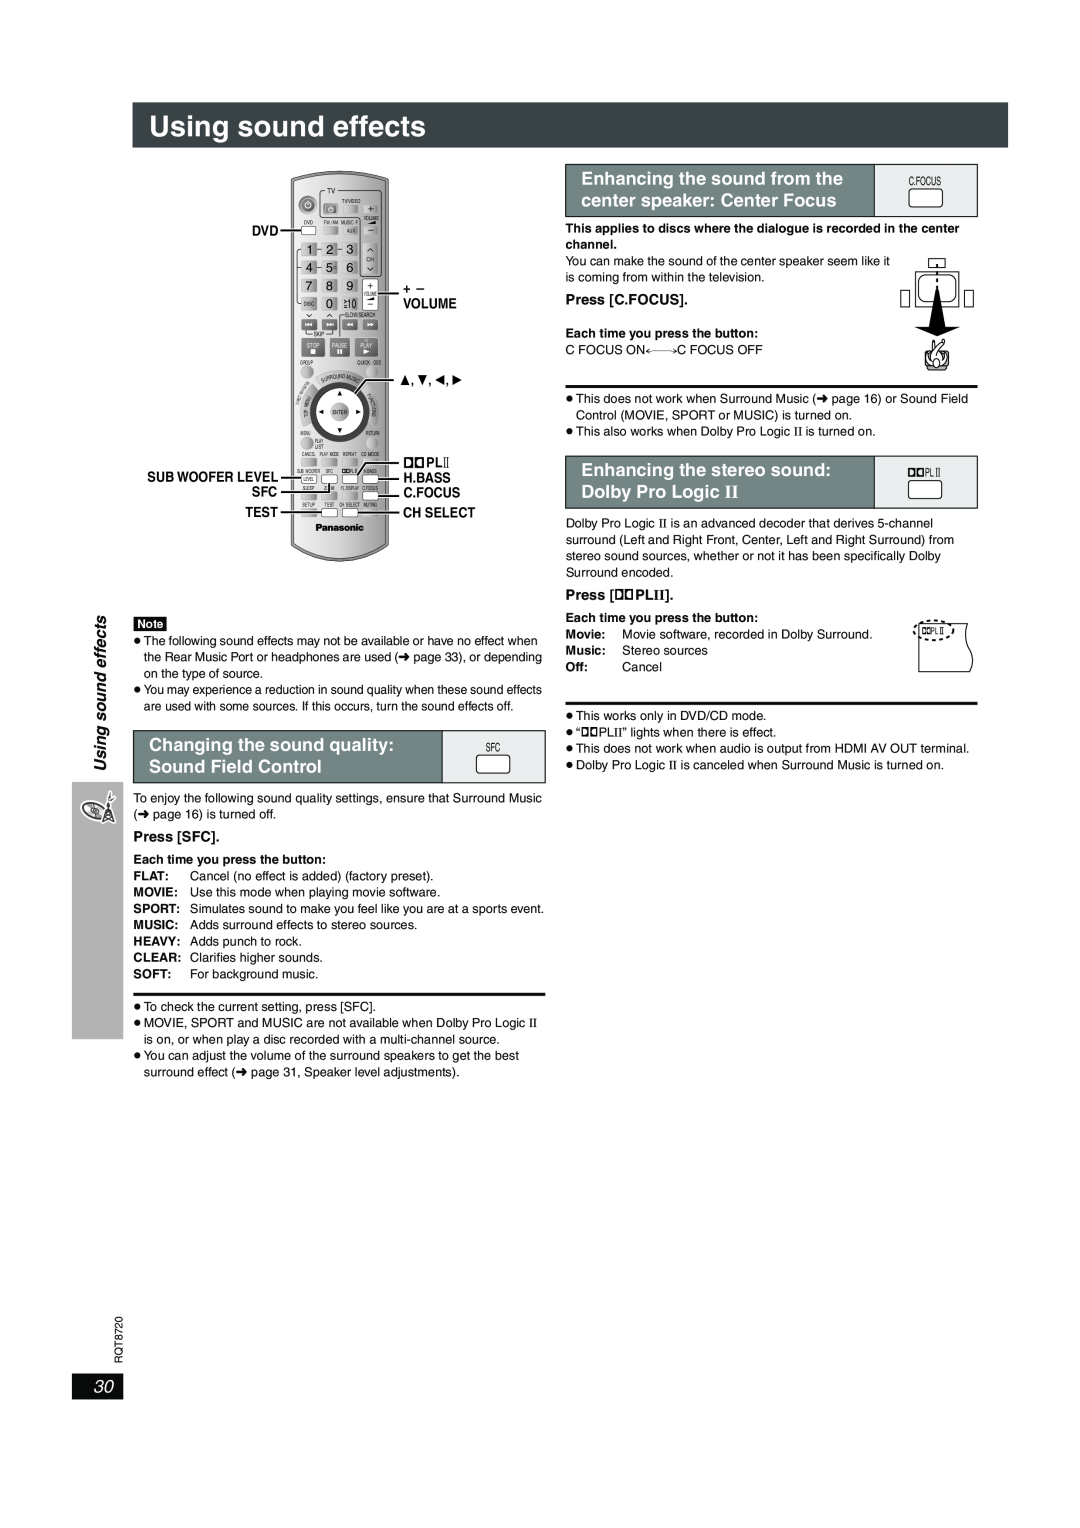 Panasonic SC-HT744 Using sound effects, Changing the sound quality, Sound Field Control, Enhancing the sound from the 